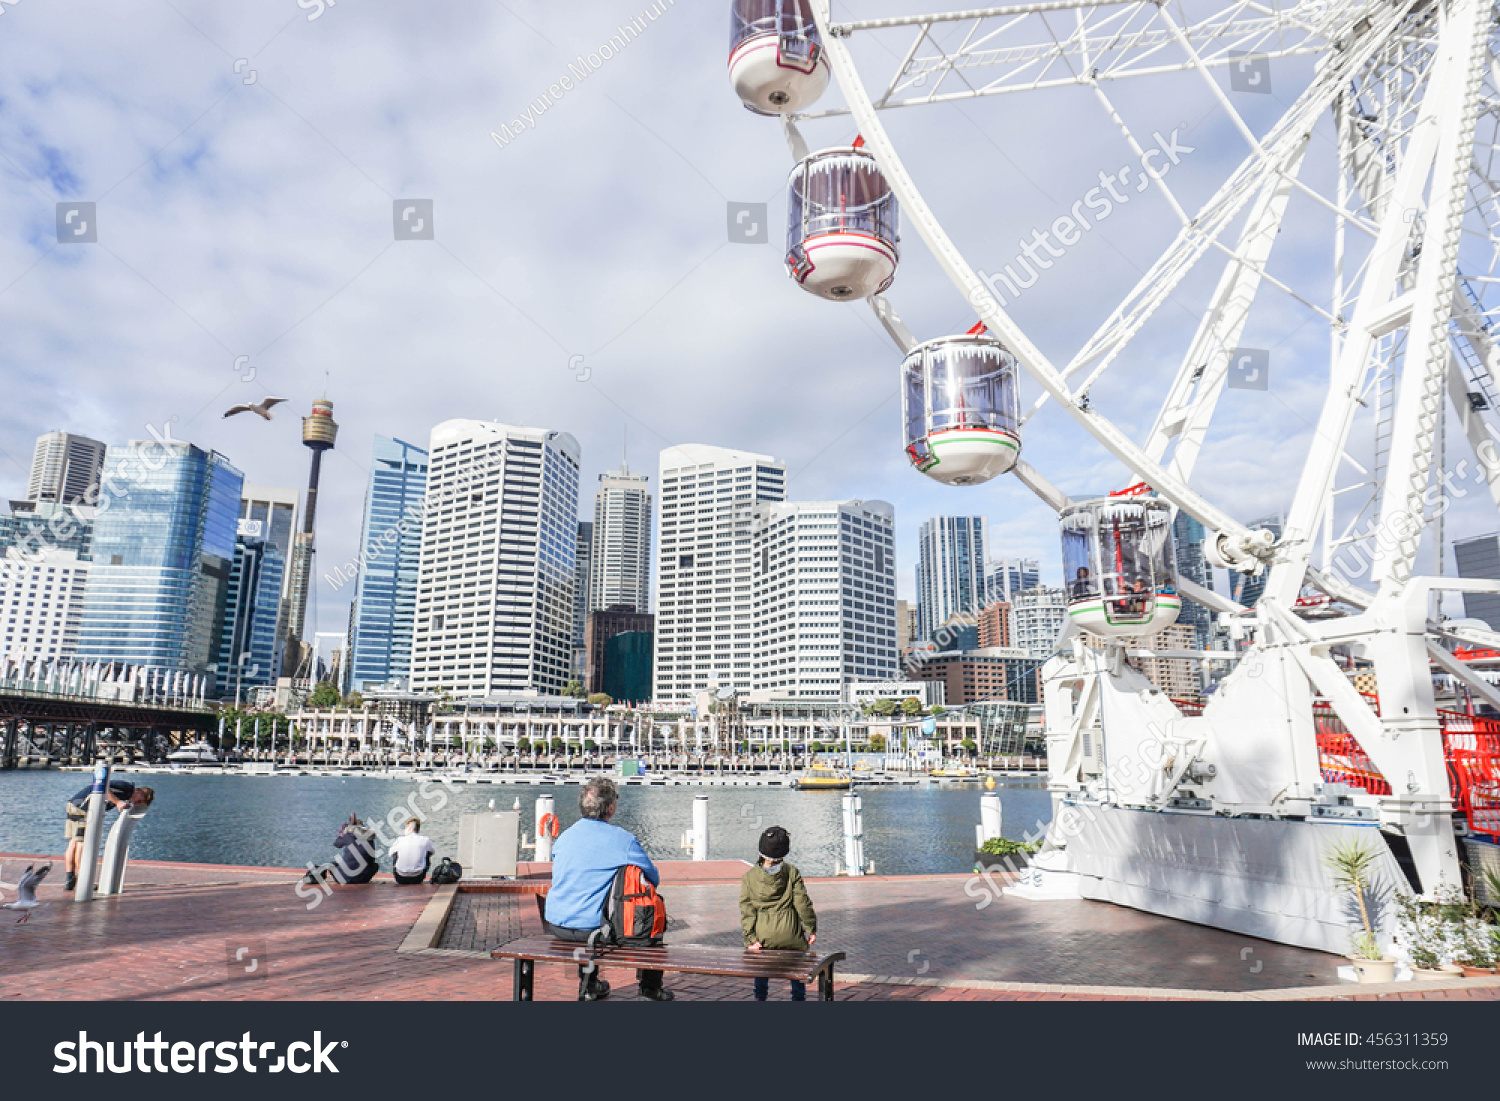 People enjoy sitting at the Darling Harbour with part of Ferris Wheel #456311359